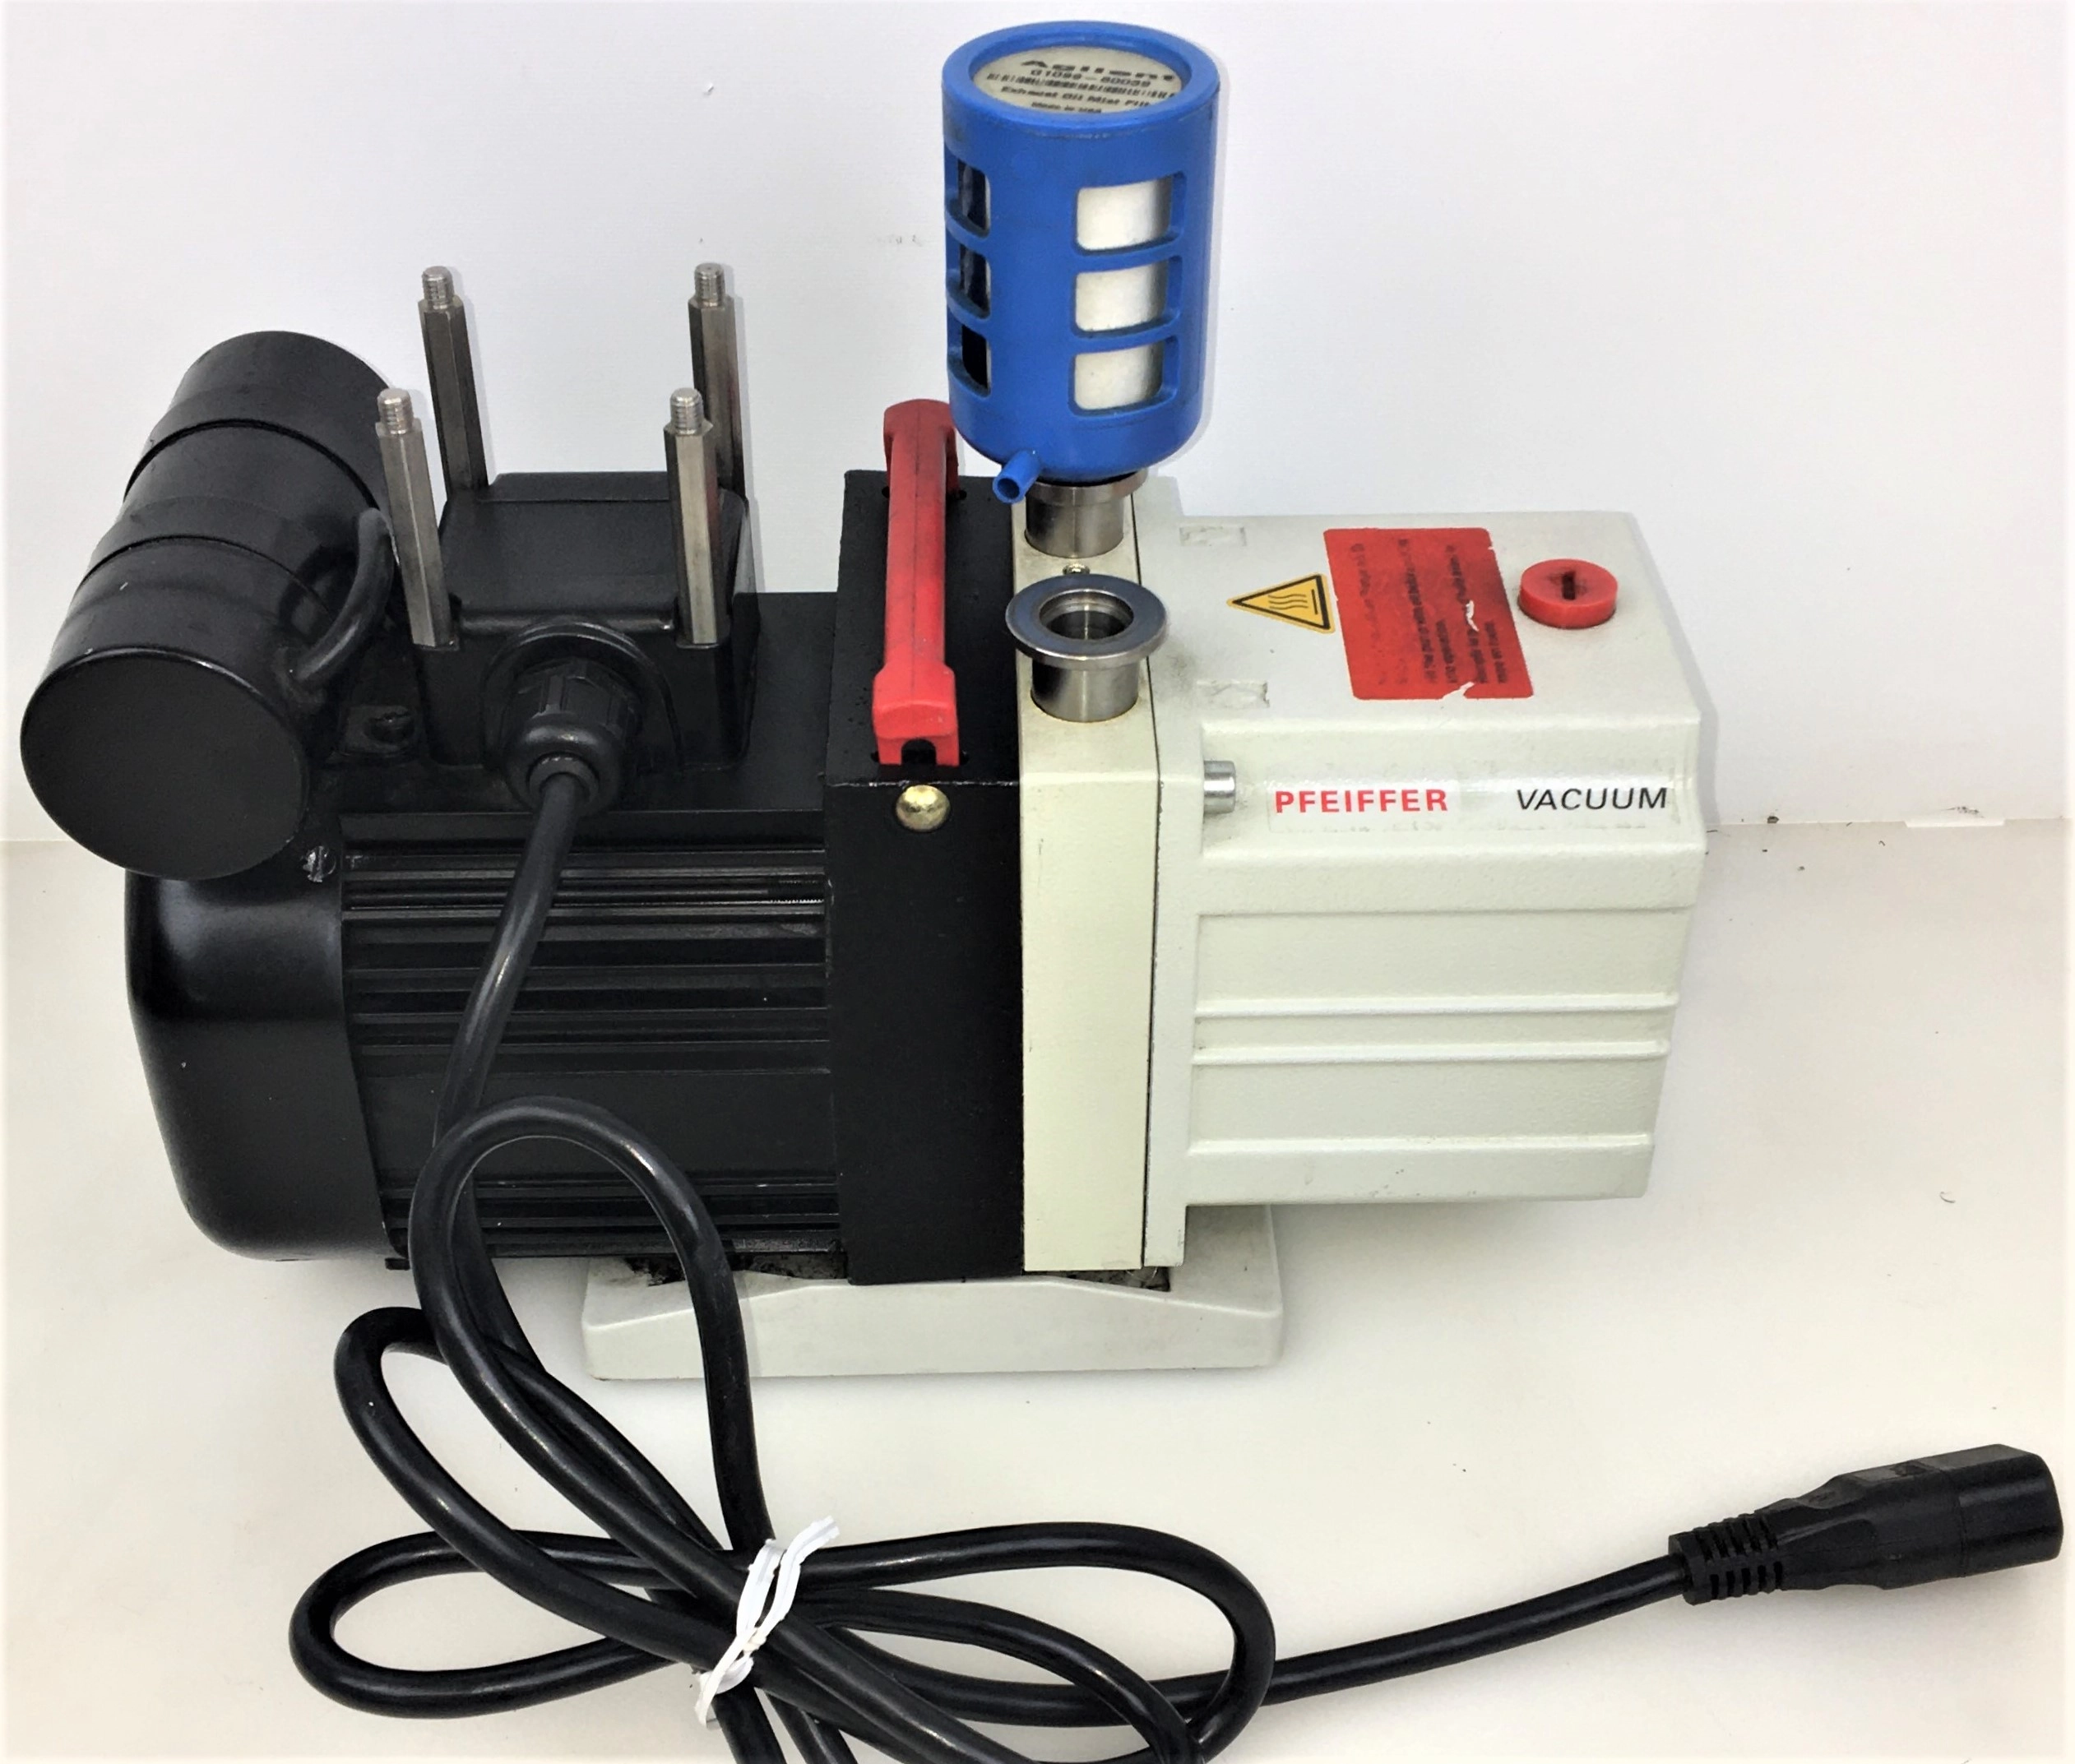 Pfeiffer DUO 2.5 Rotary Vacuum Pump with Oil Mist Filter - 1.7cfm